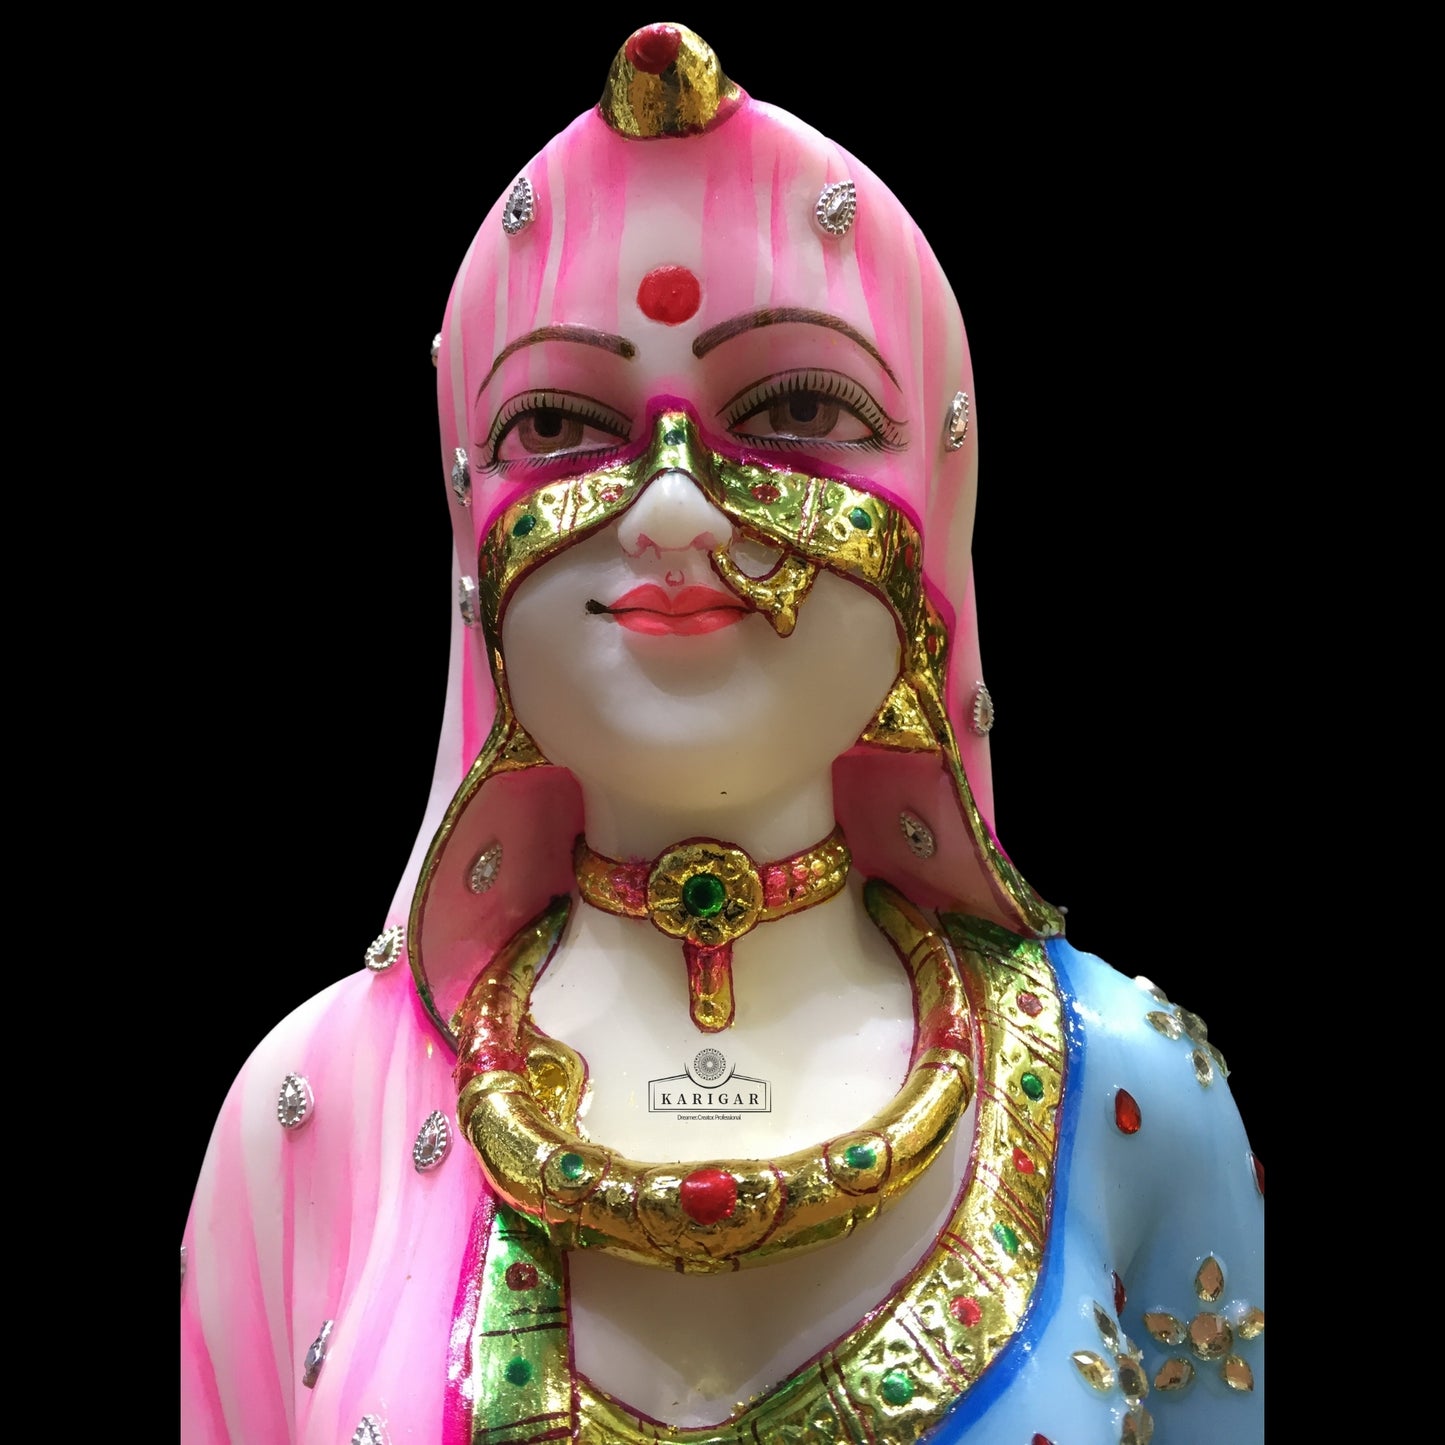 Bani Thani Bust Statue, Large 9 inches Murti, The Indian Mona Lisa Bust Marble Sculpture, Traditional Indian Women Figurine Bust, Multicolor Jewelry Clothes Figurine - Home Office Decor Gifts (Pink)